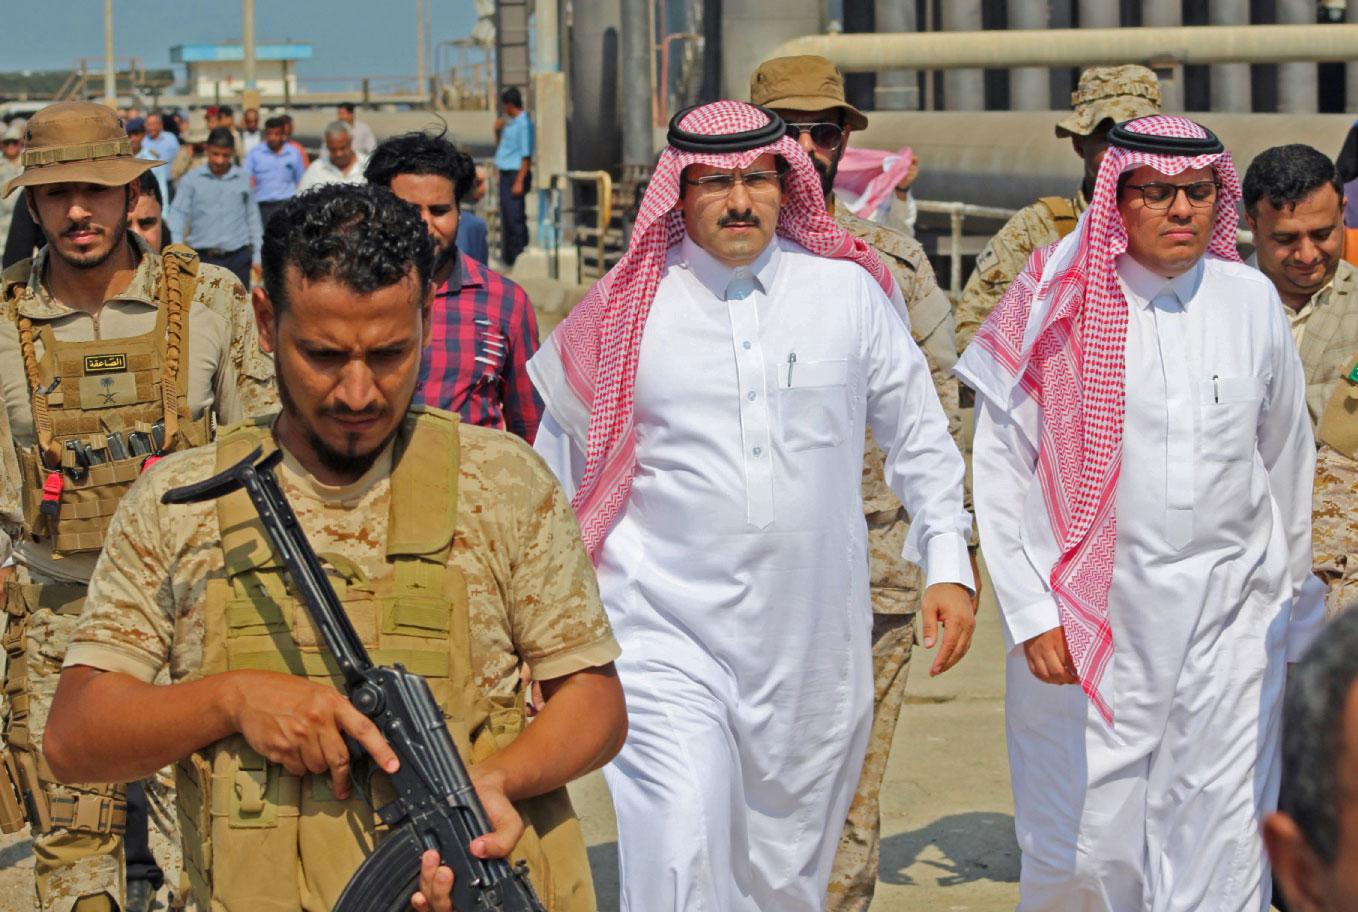 Saudi ambassador to Yemen Mohammed Said Al-Jaber (C) arrives in the southern Yemeni port of Aden to oversee an aid delivery of fuel from Saudi Arabia on October 29, 2018.